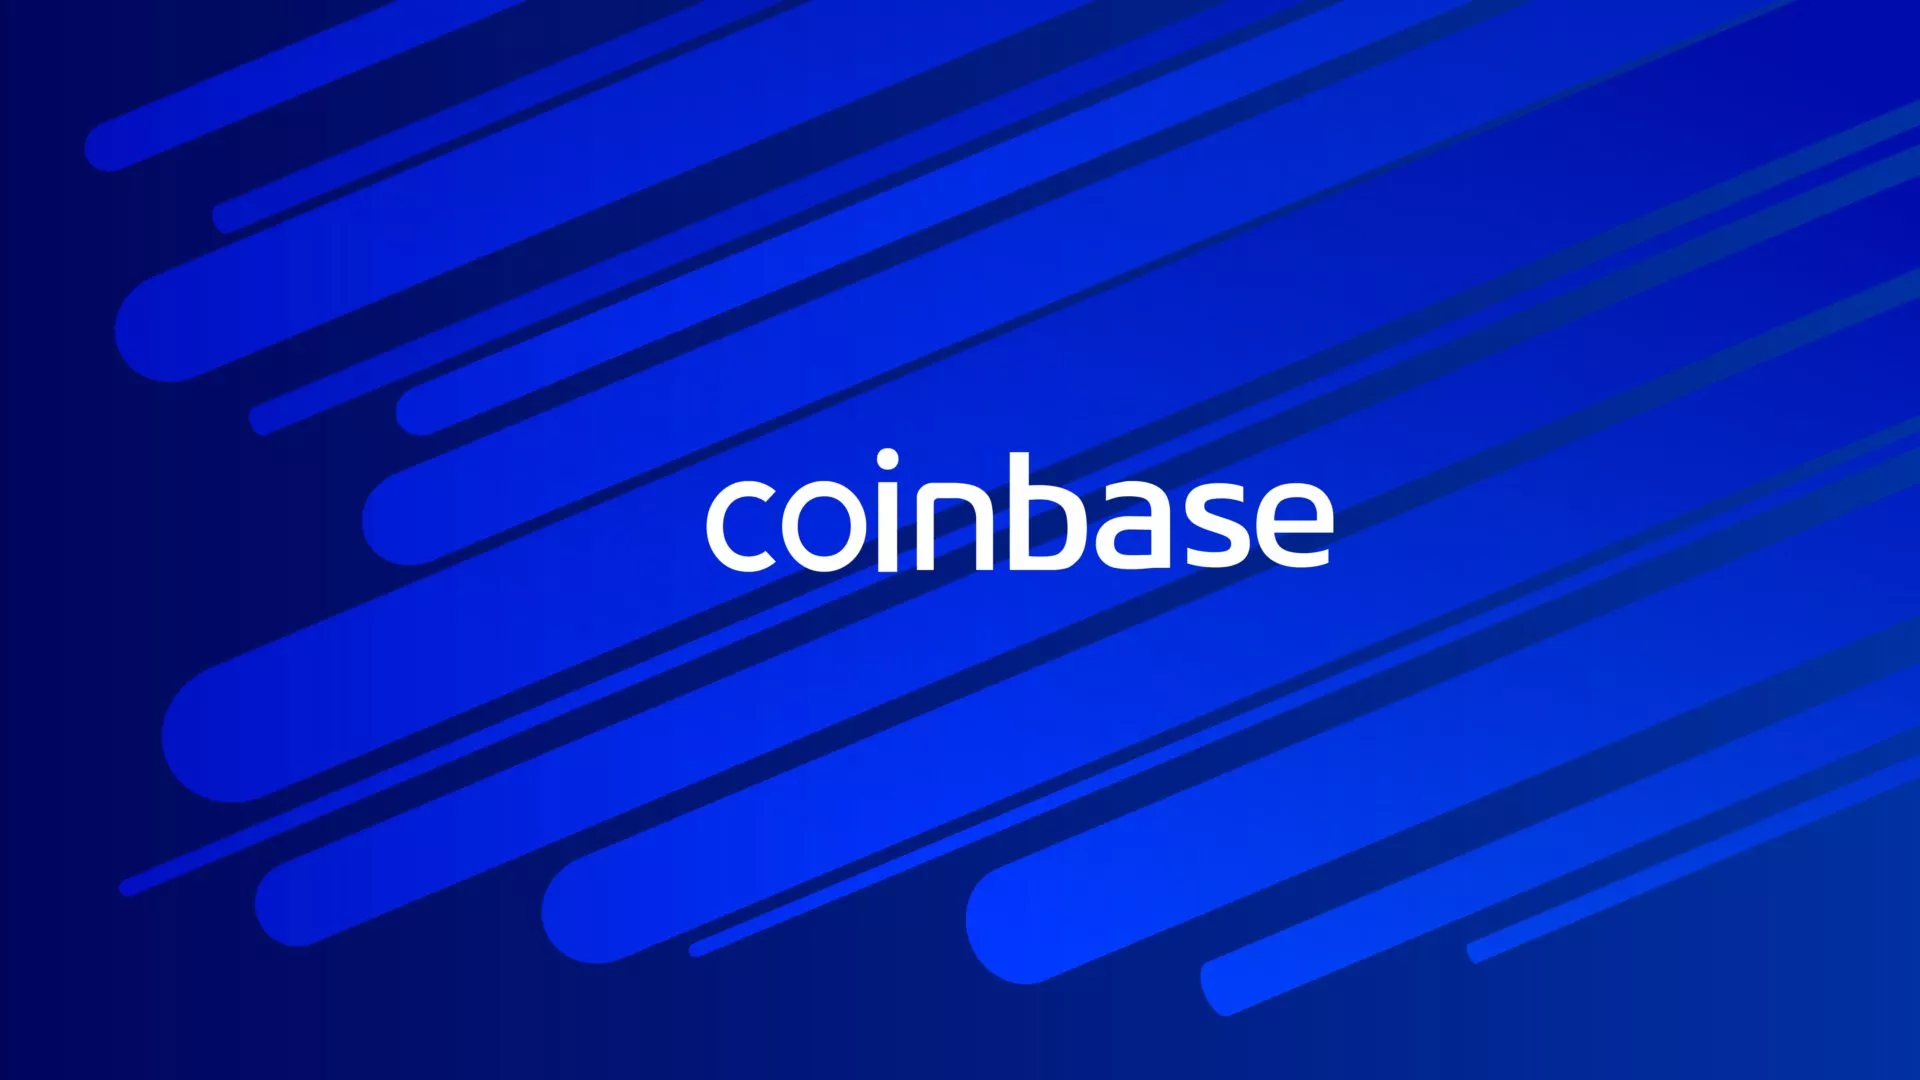 Coinbase cryptocurrency stock market name on abstract digital ba